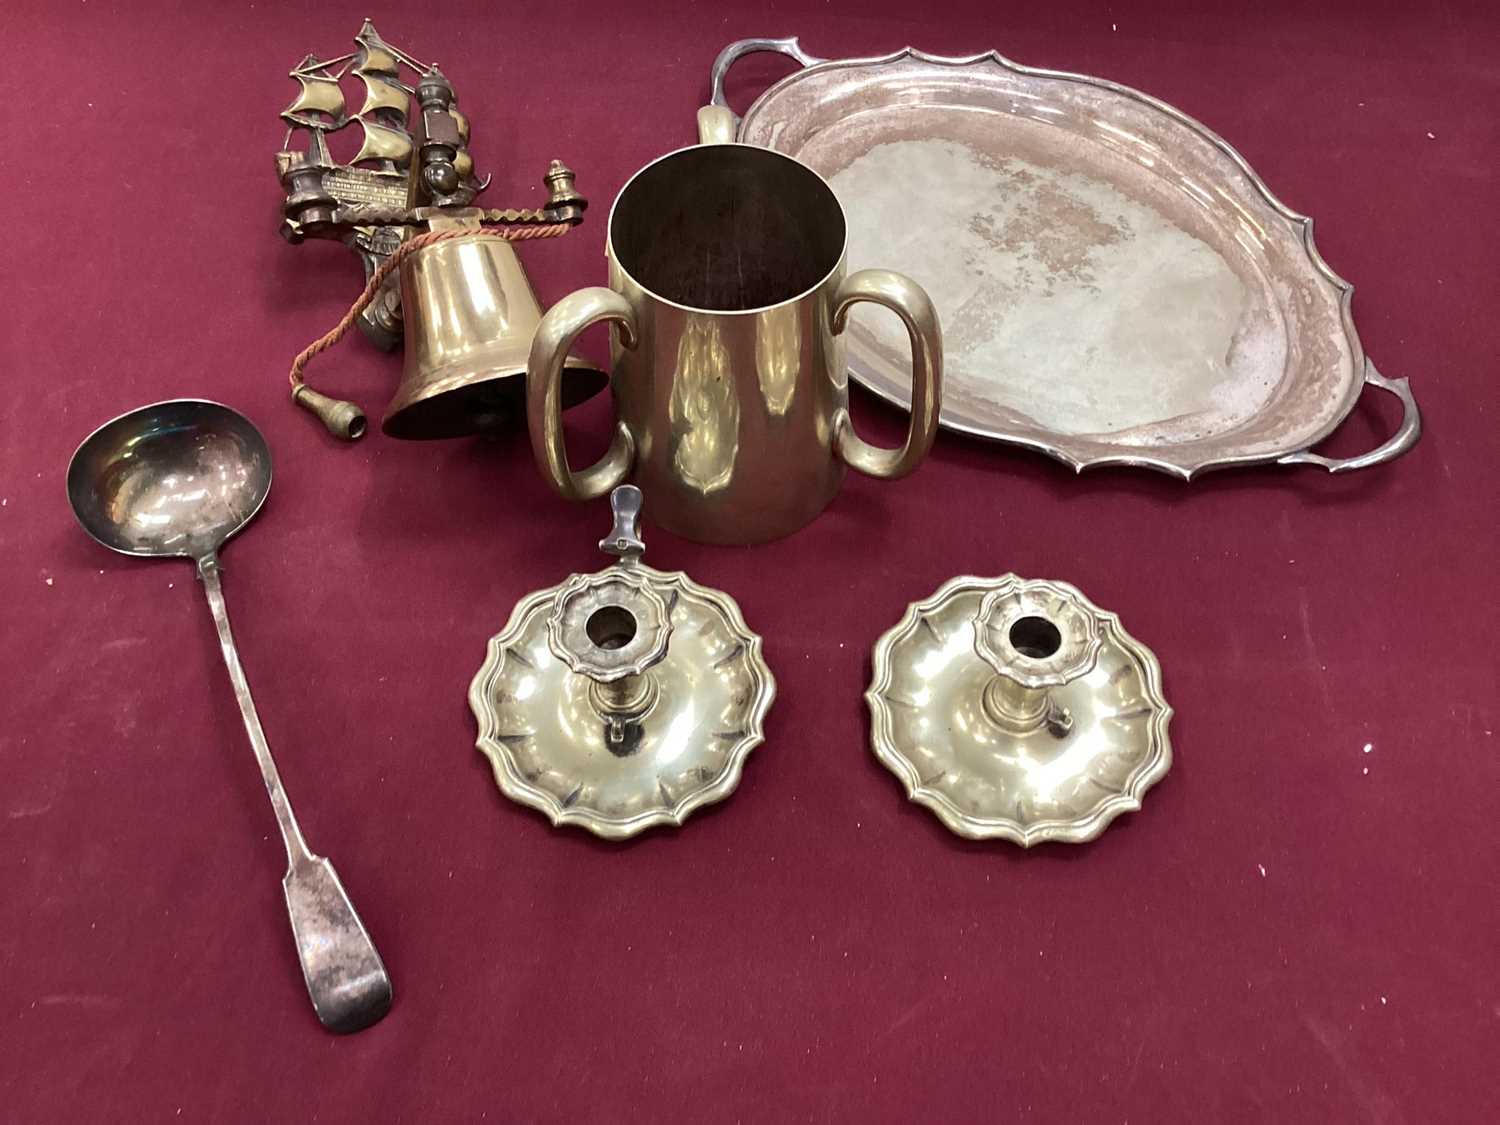 Lot 2642 - Collection of silver plated ware to include Tyg engraved 'U.C.S. Bicycle Race', pair of chamber sticks and cutlery sets together with a brass bell (1 box)